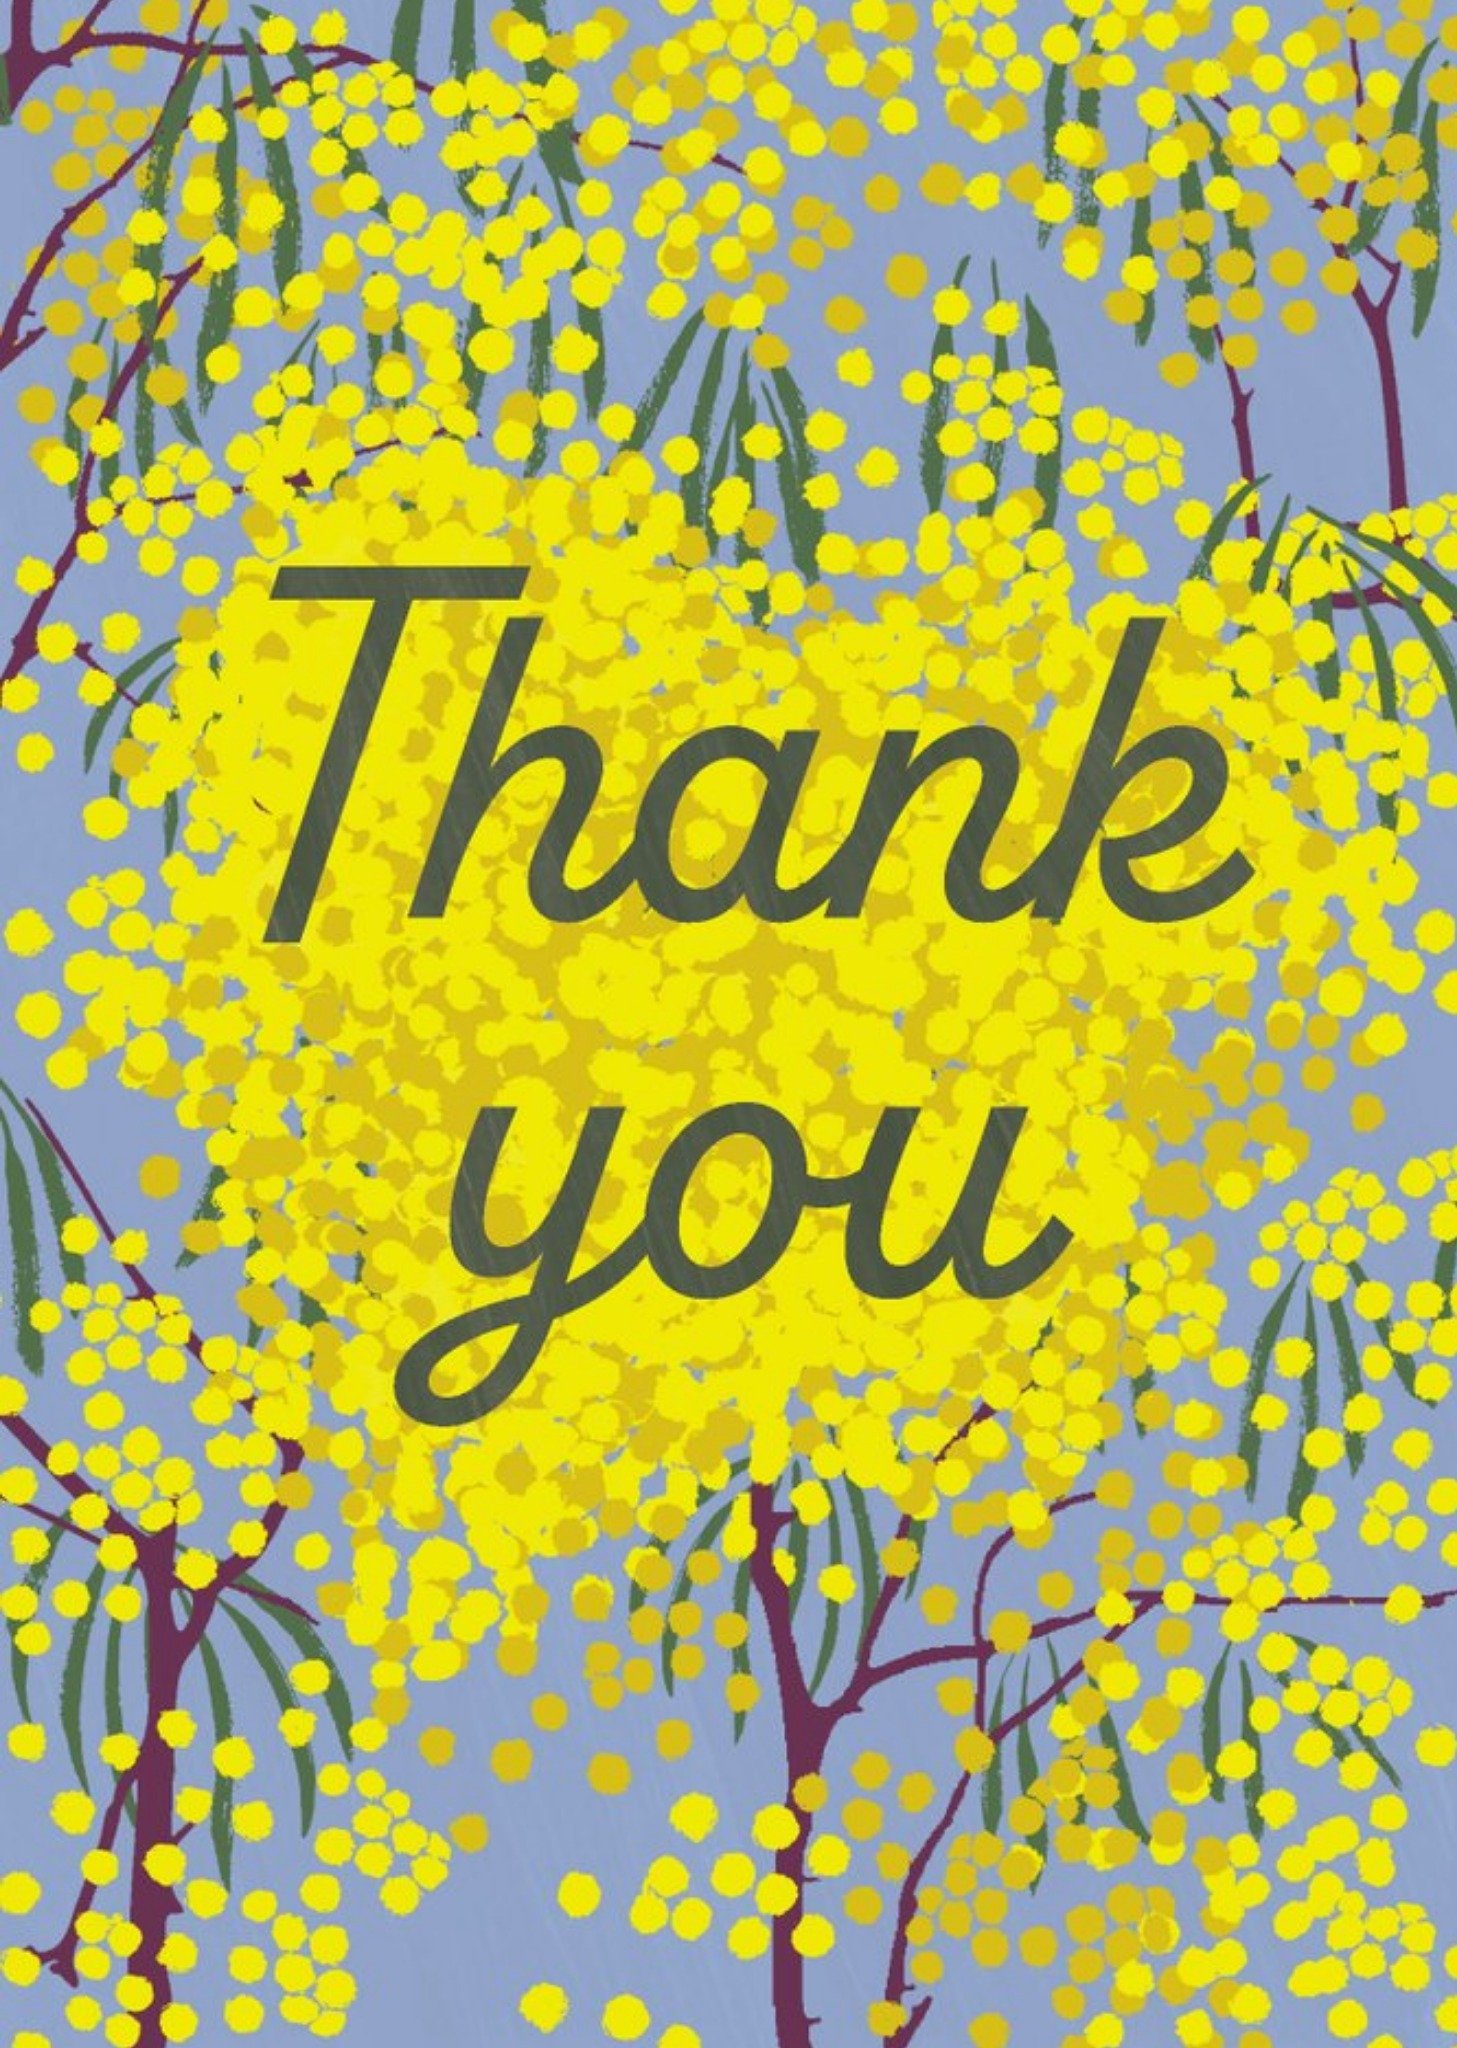 Moonpig Illustration Of A Tree With Yellow Flowers Thank You Card, Large